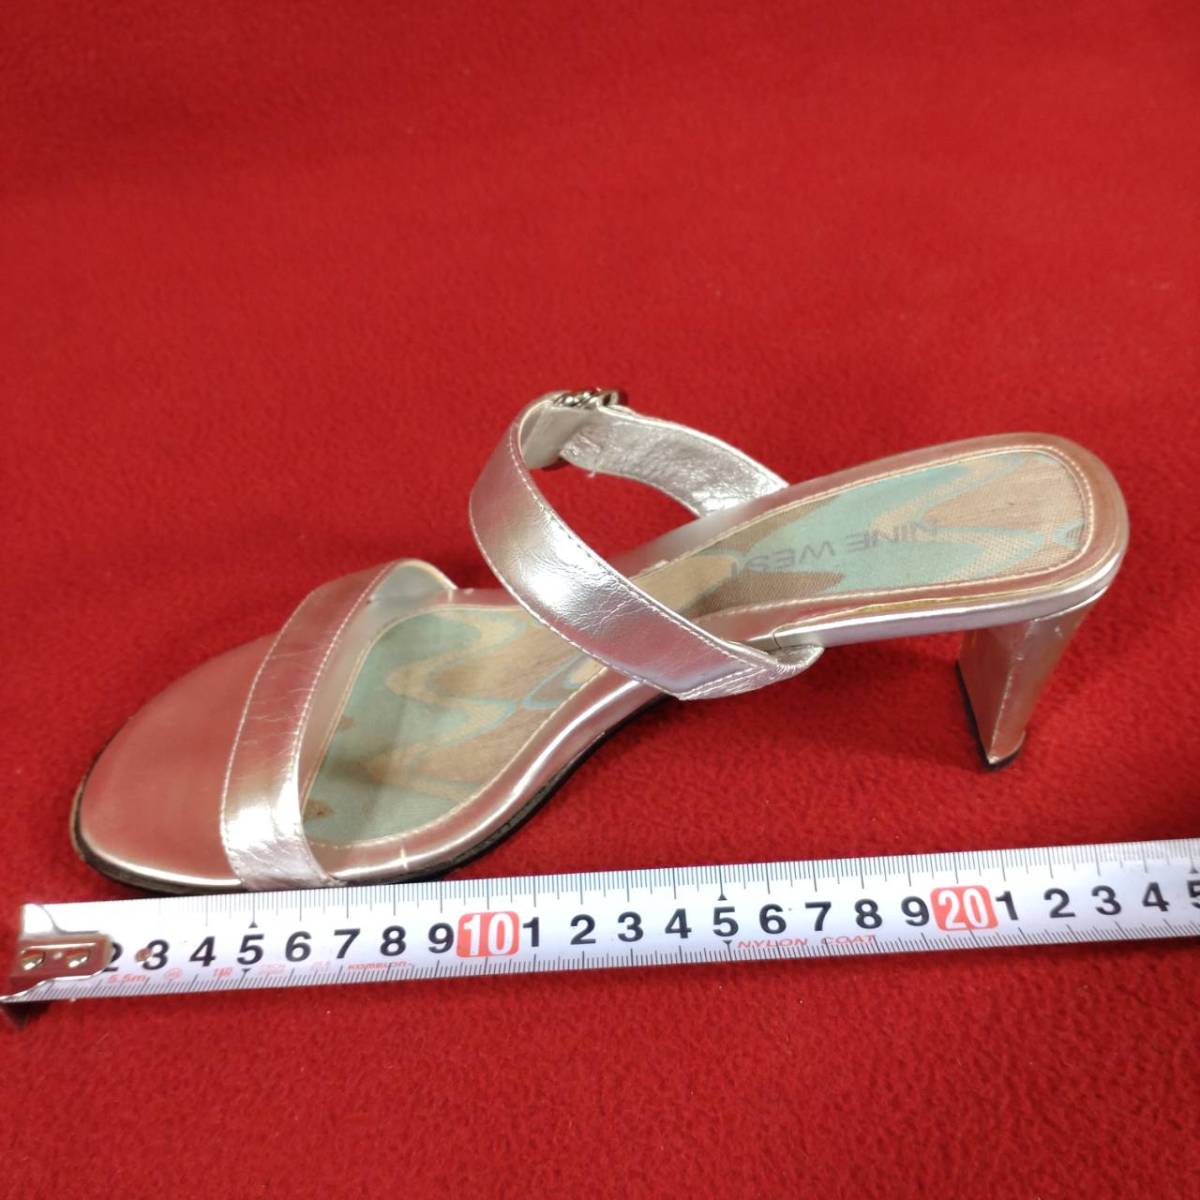 ④ Nine West NINE WEST mules 7M Japan size 24cm silver sandals lady's fashion casual na in waste to